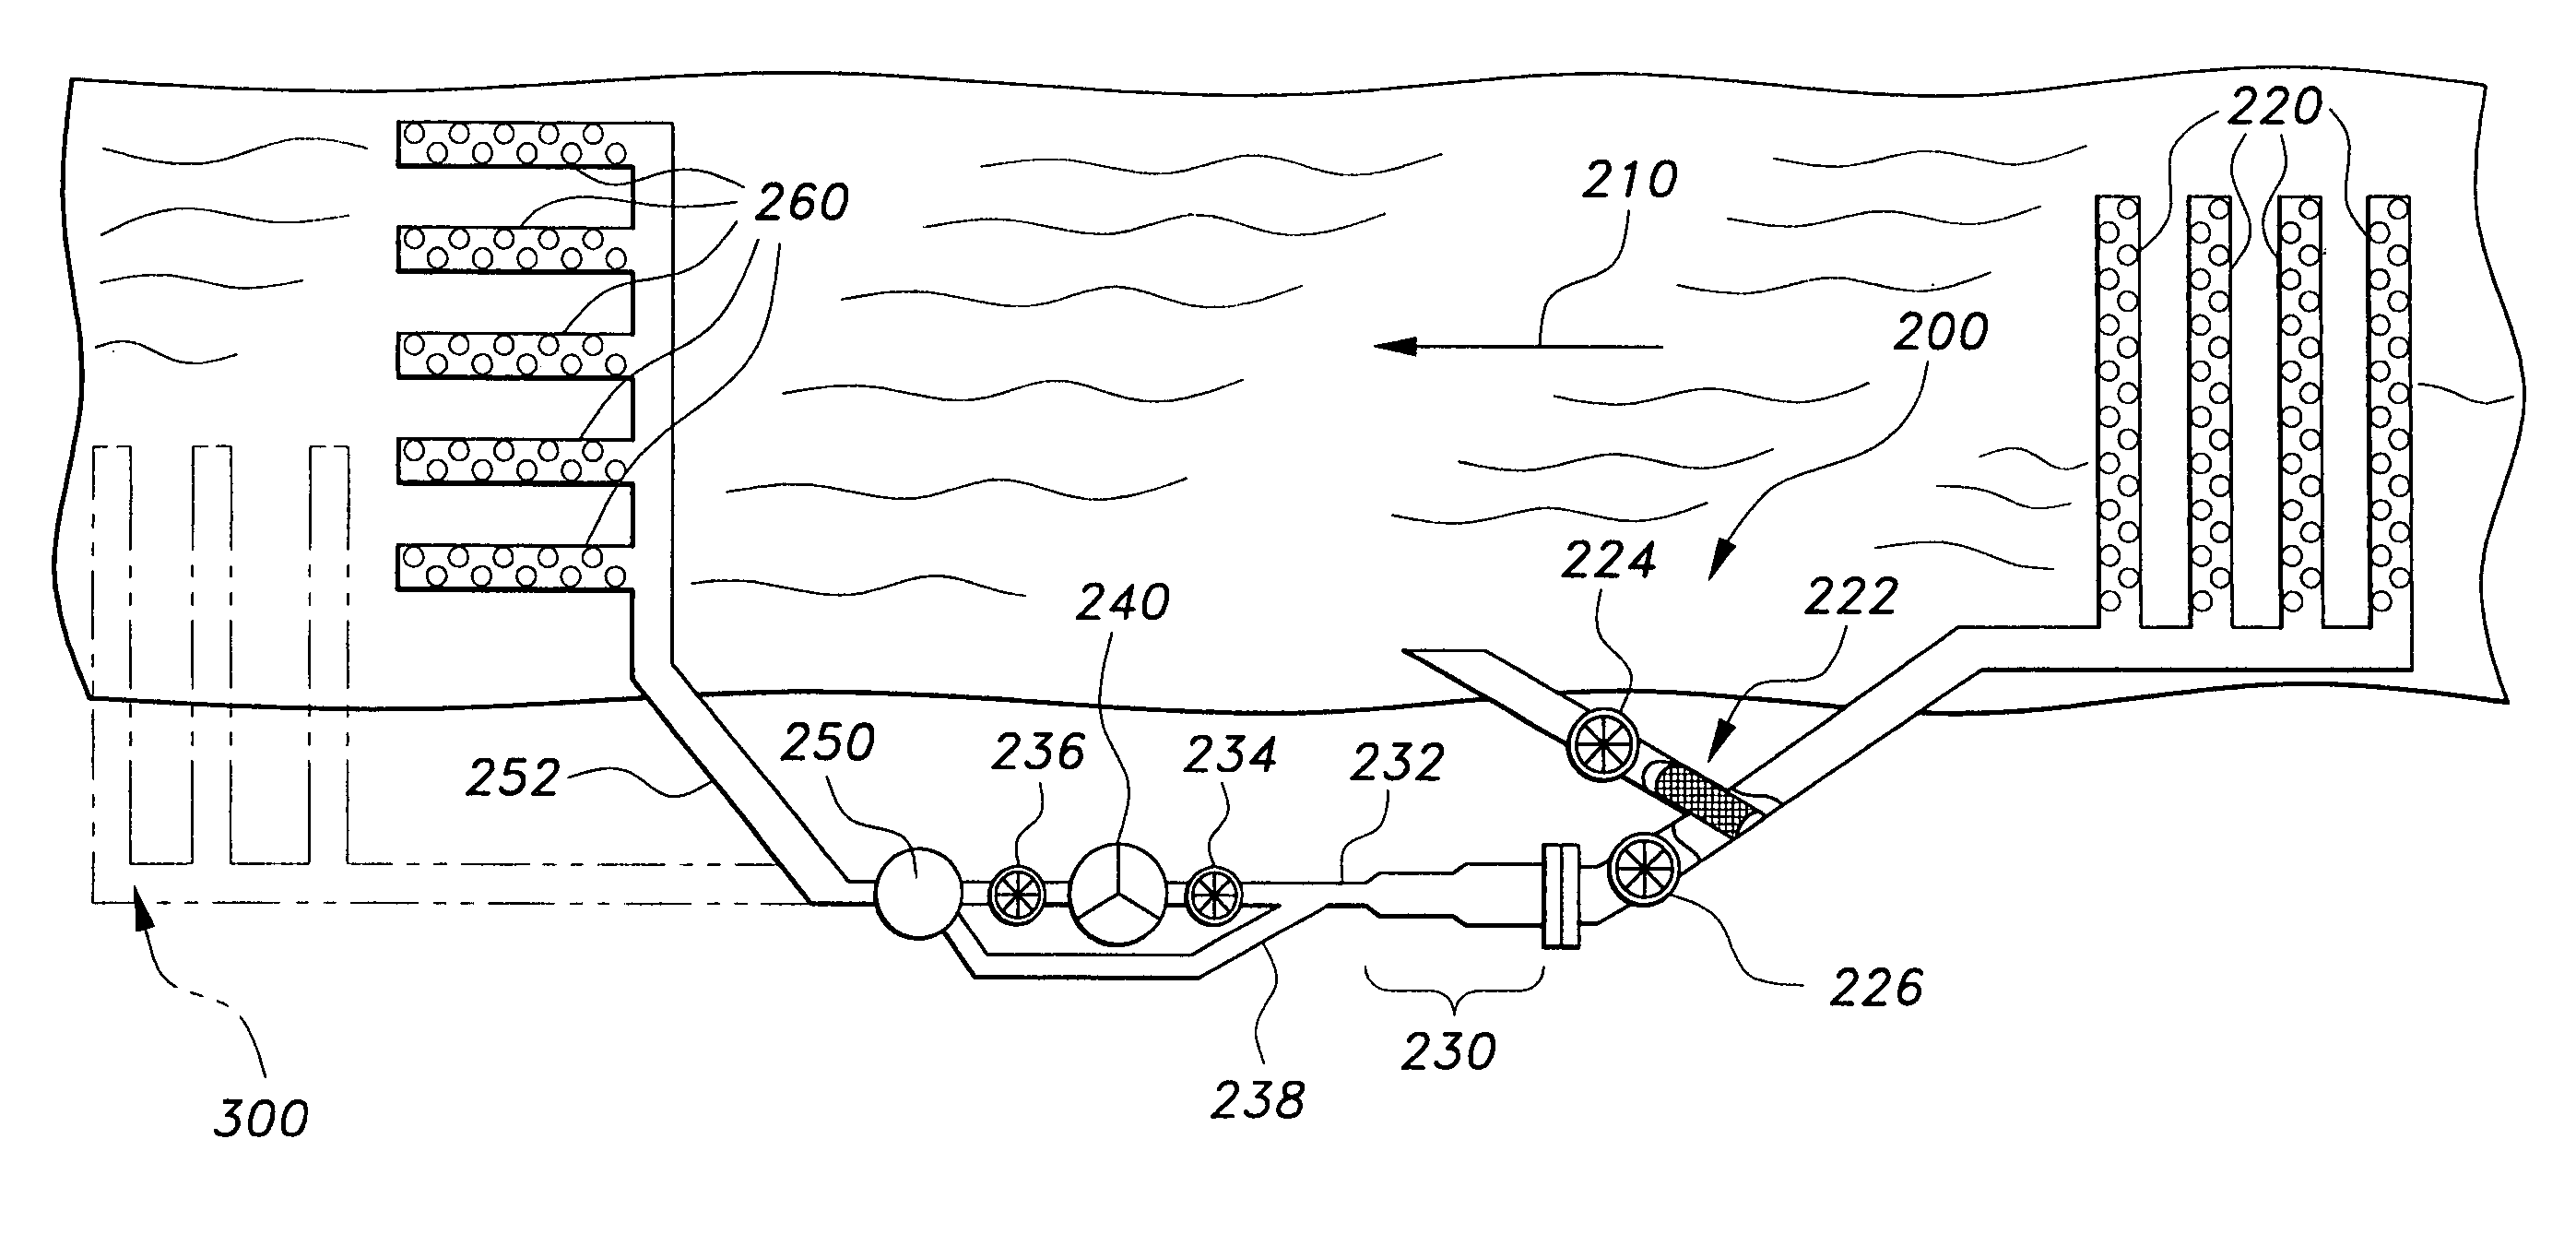 Method and apparatus for generating hydro-electric power